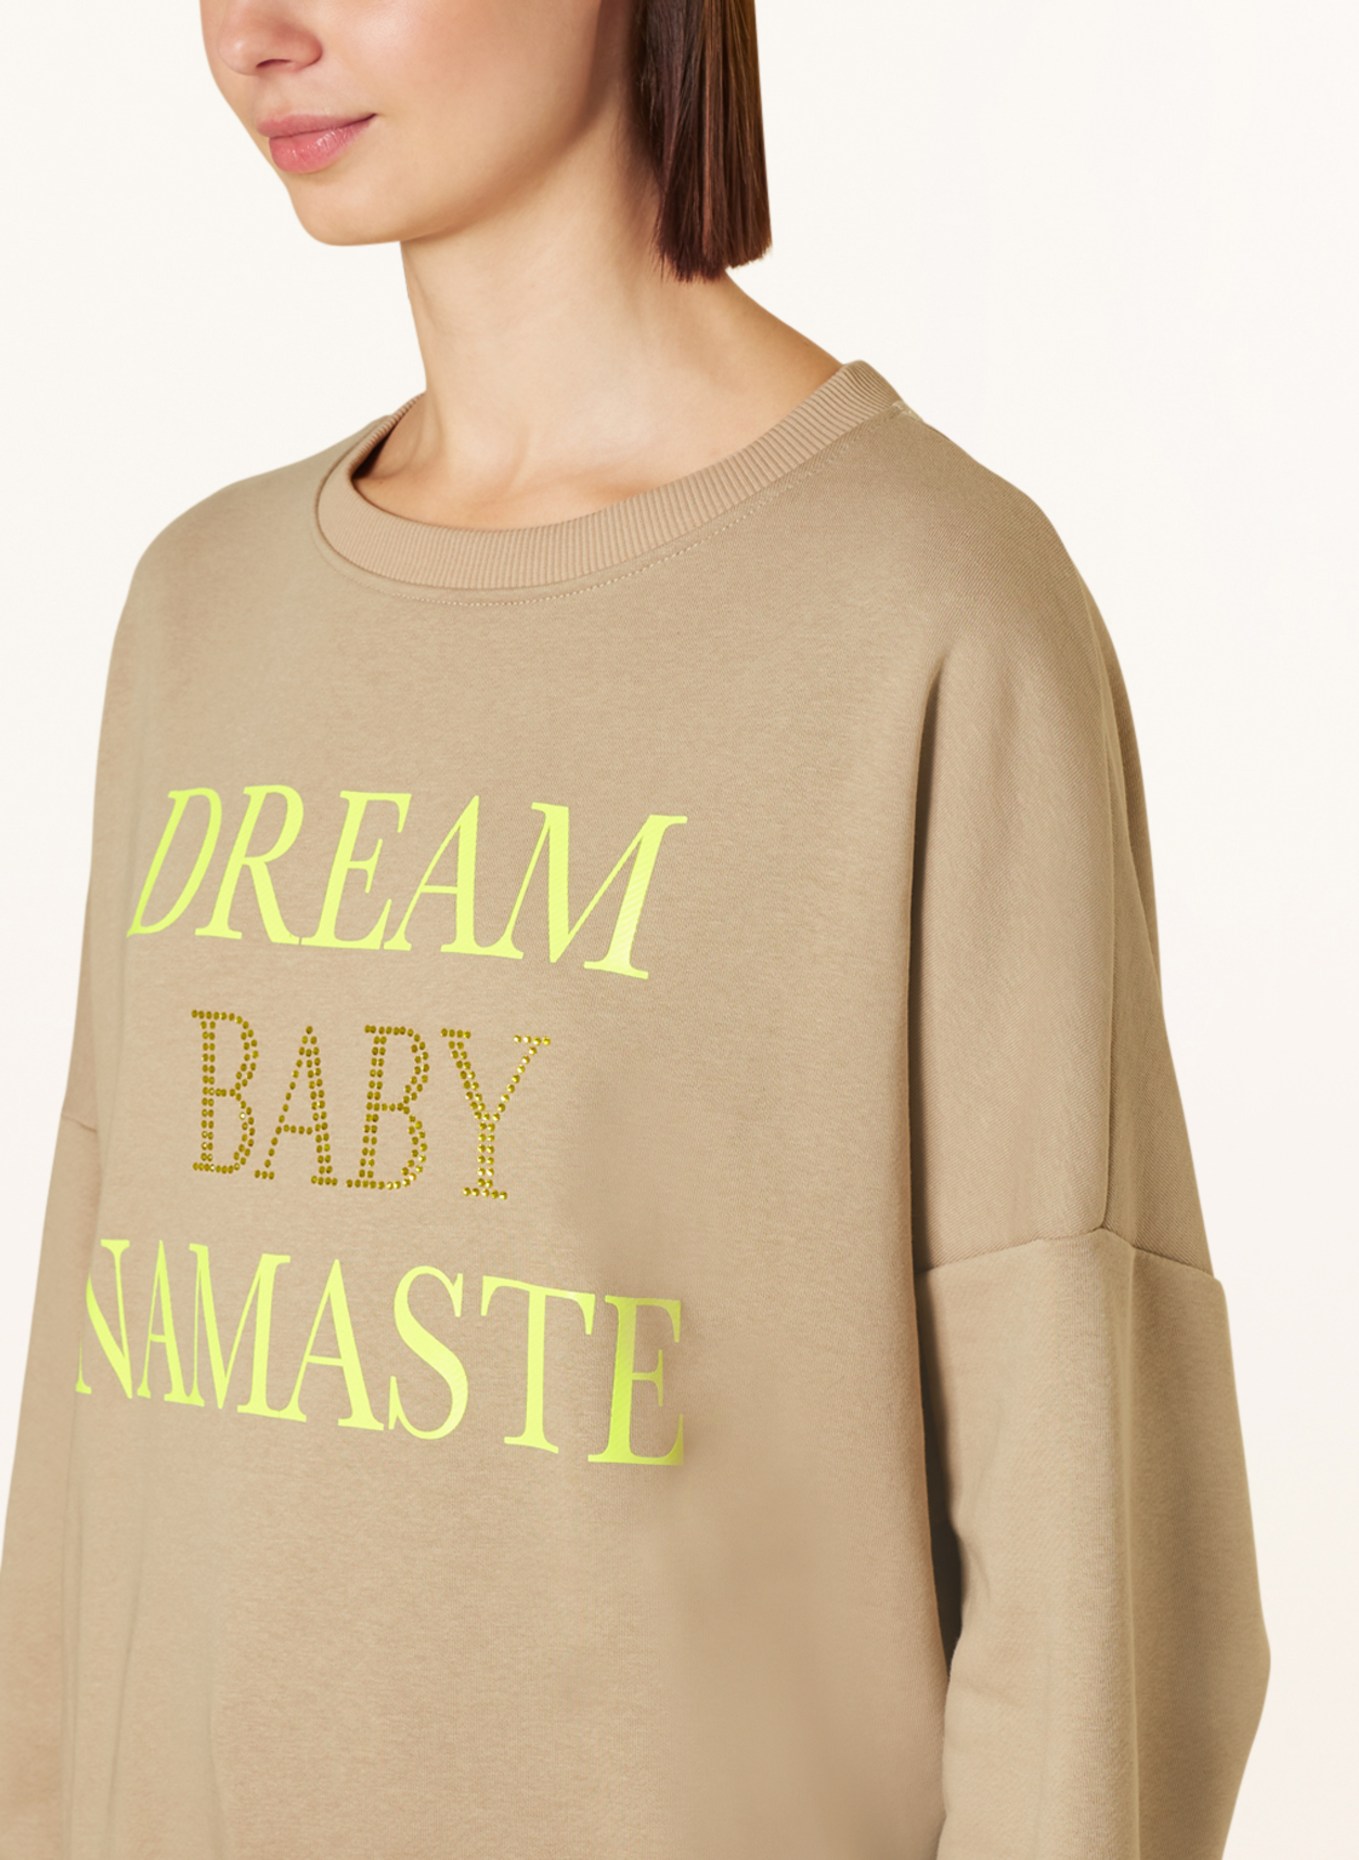 miss goodlife Sweatshirt with decorative gems, Color: BEIGE/ NEON YELLOW/ GOLD (Image 4)